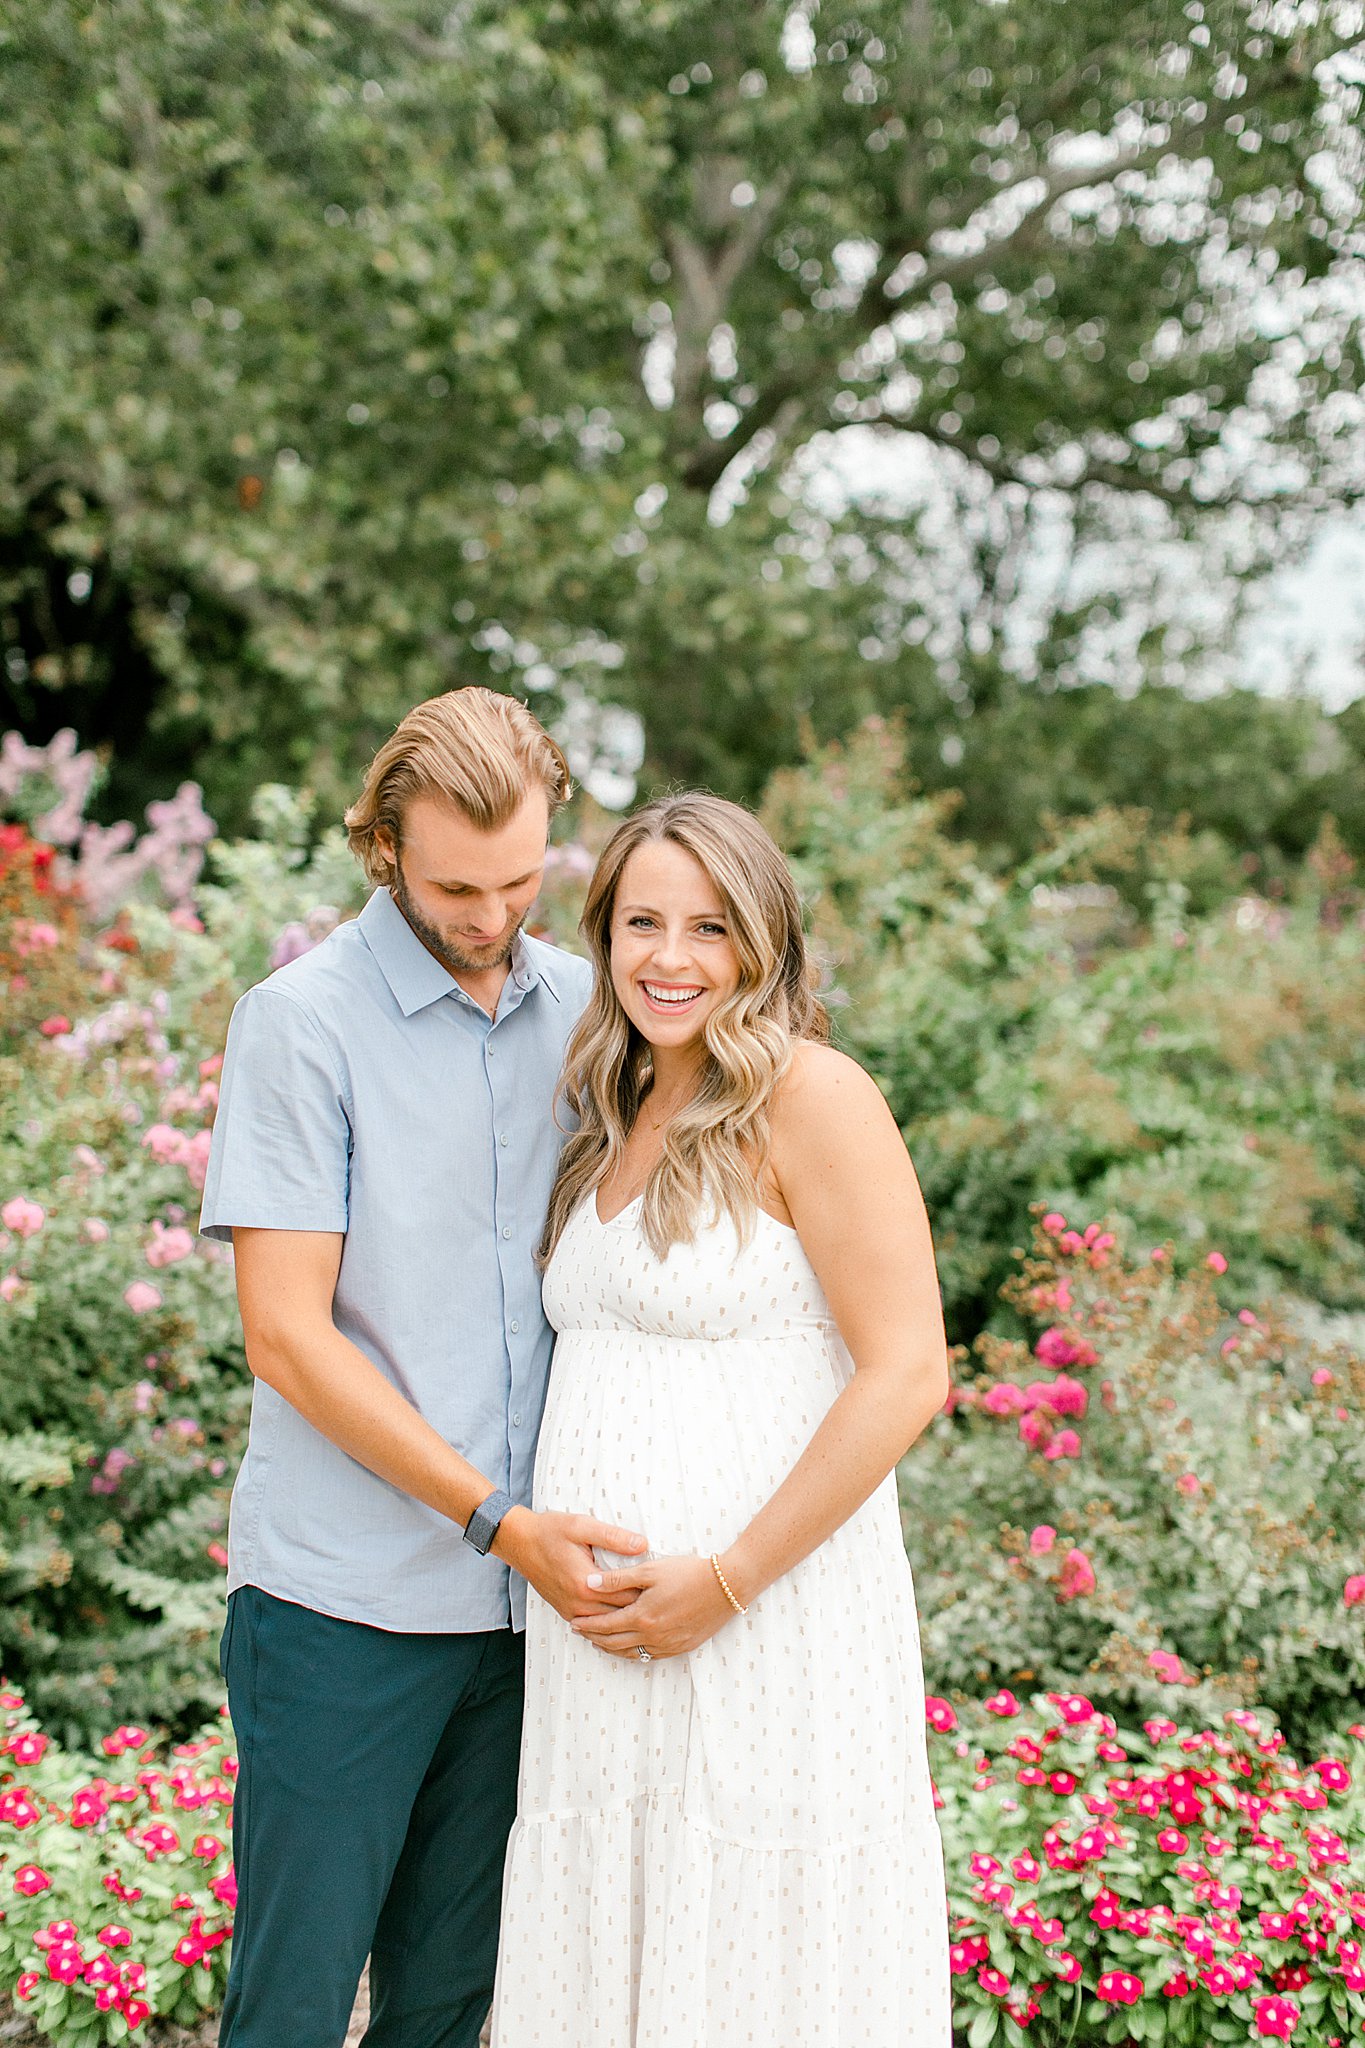 pregnancy photos for okc couple at will rogers gardens